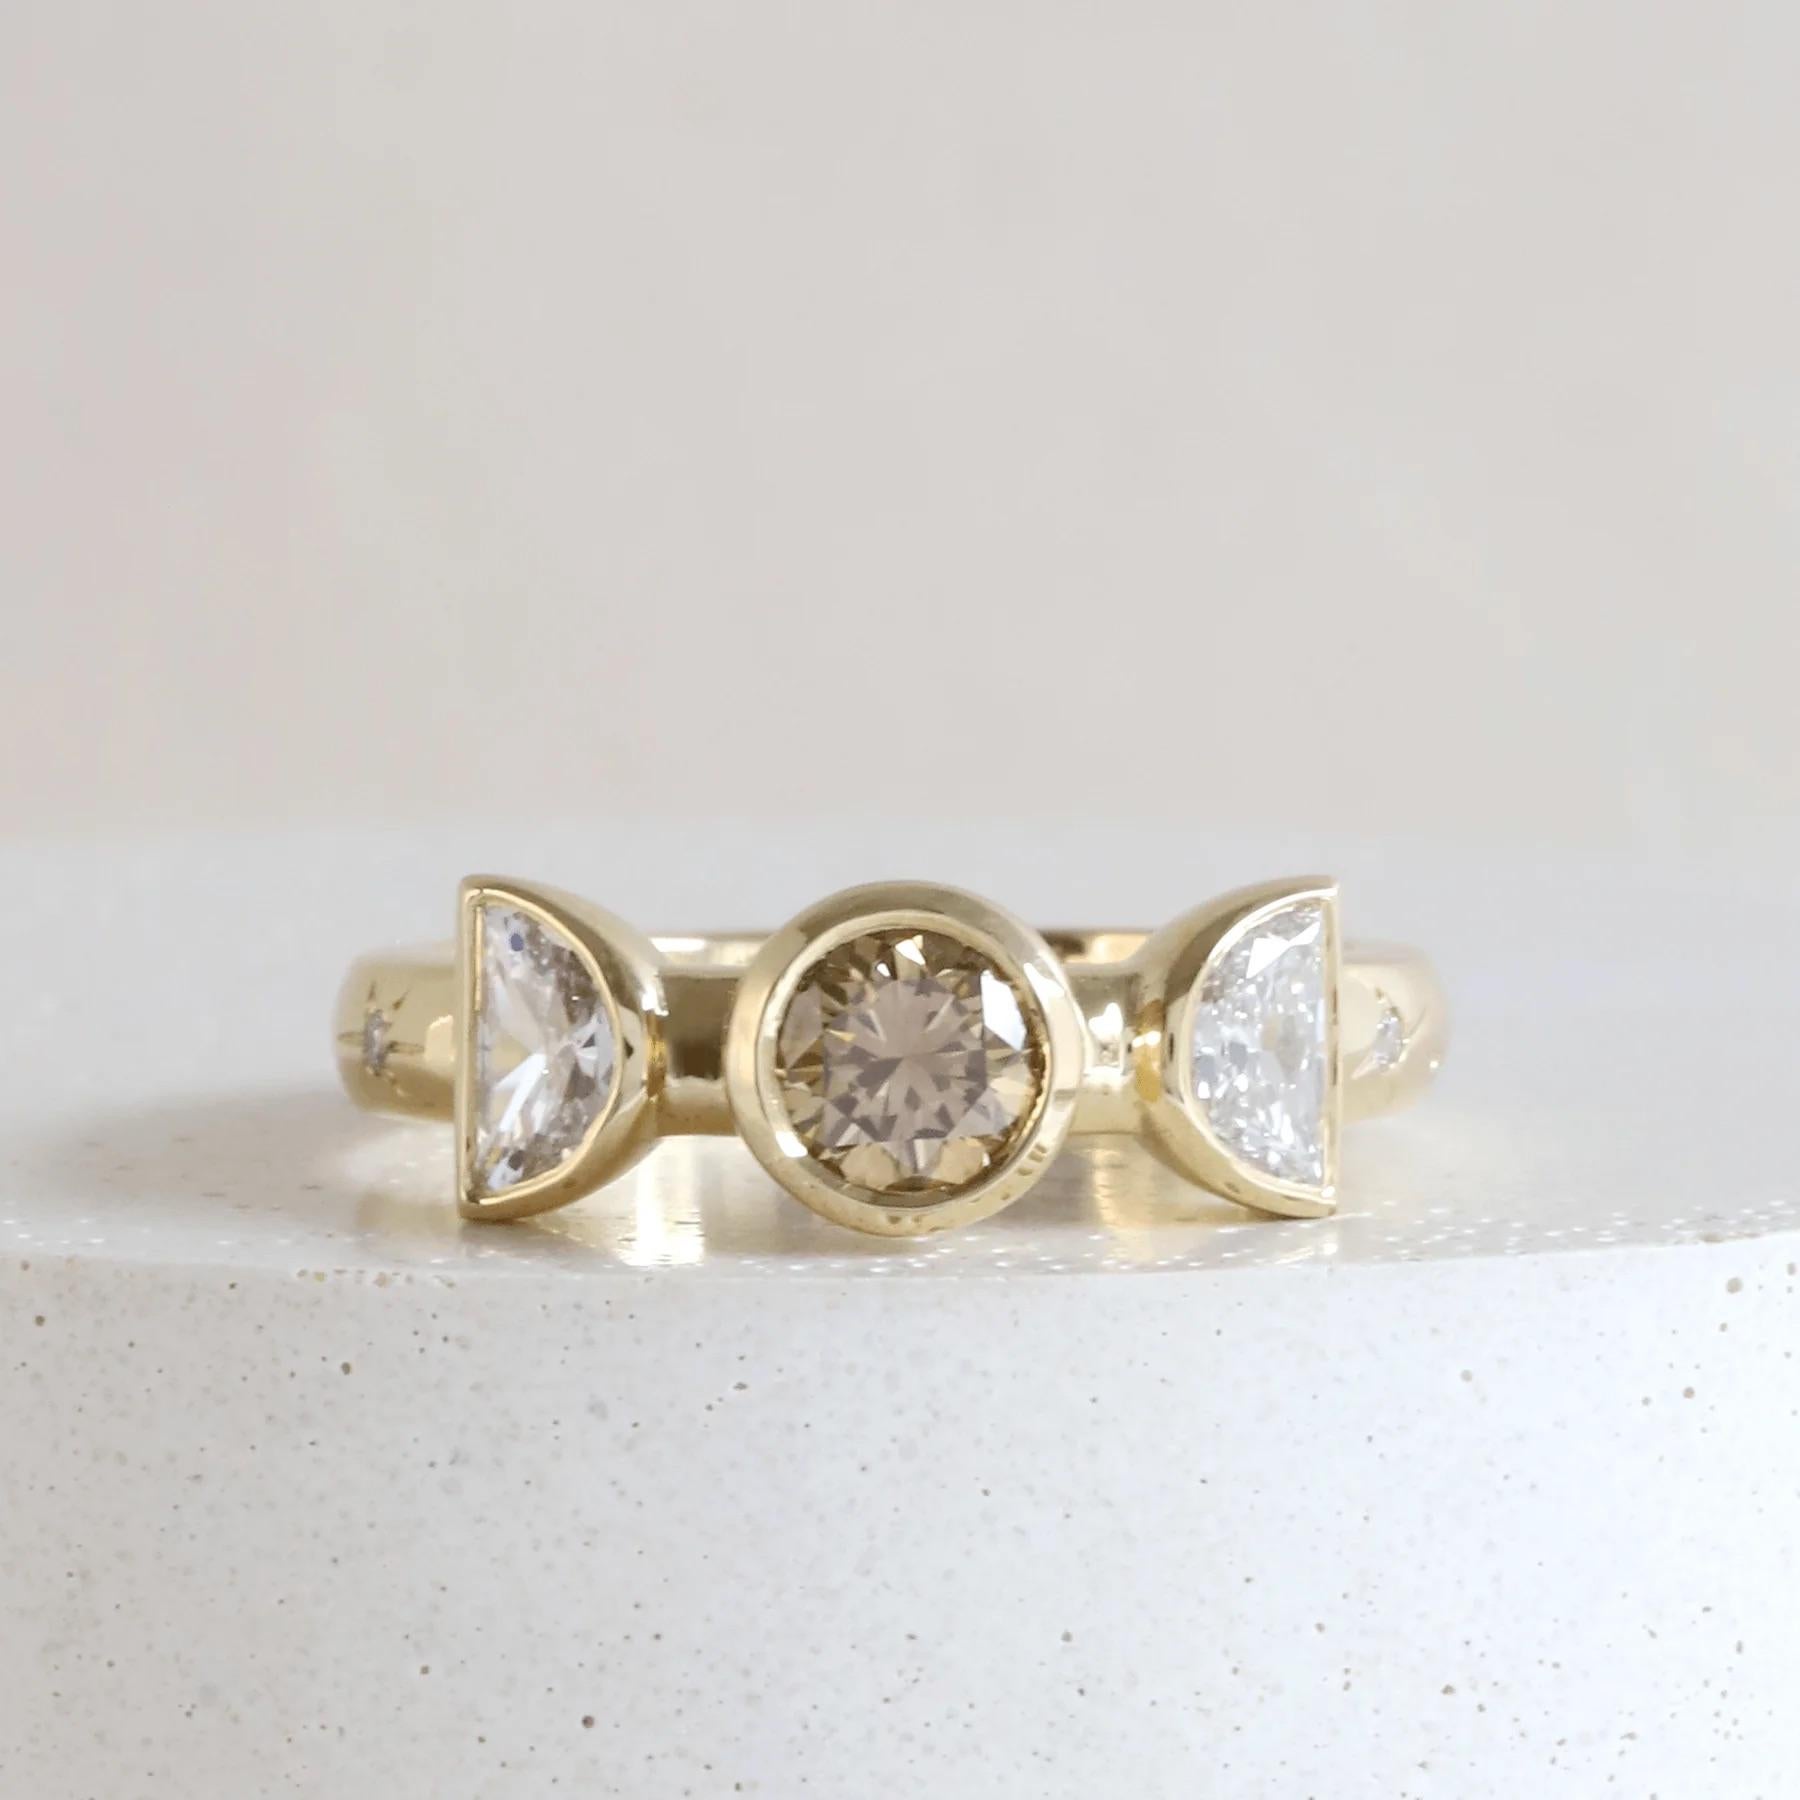 Harvest Moon Ring

18K Yellow Bezel Diamond Ring set with West Australian origin Medium Champagne/Brown Diamond with natural Half-Moons sides & diamond-set Hand Engraved Stars on the shank.

18K AKARA People+Planet Yellow Gold*, Serial Number